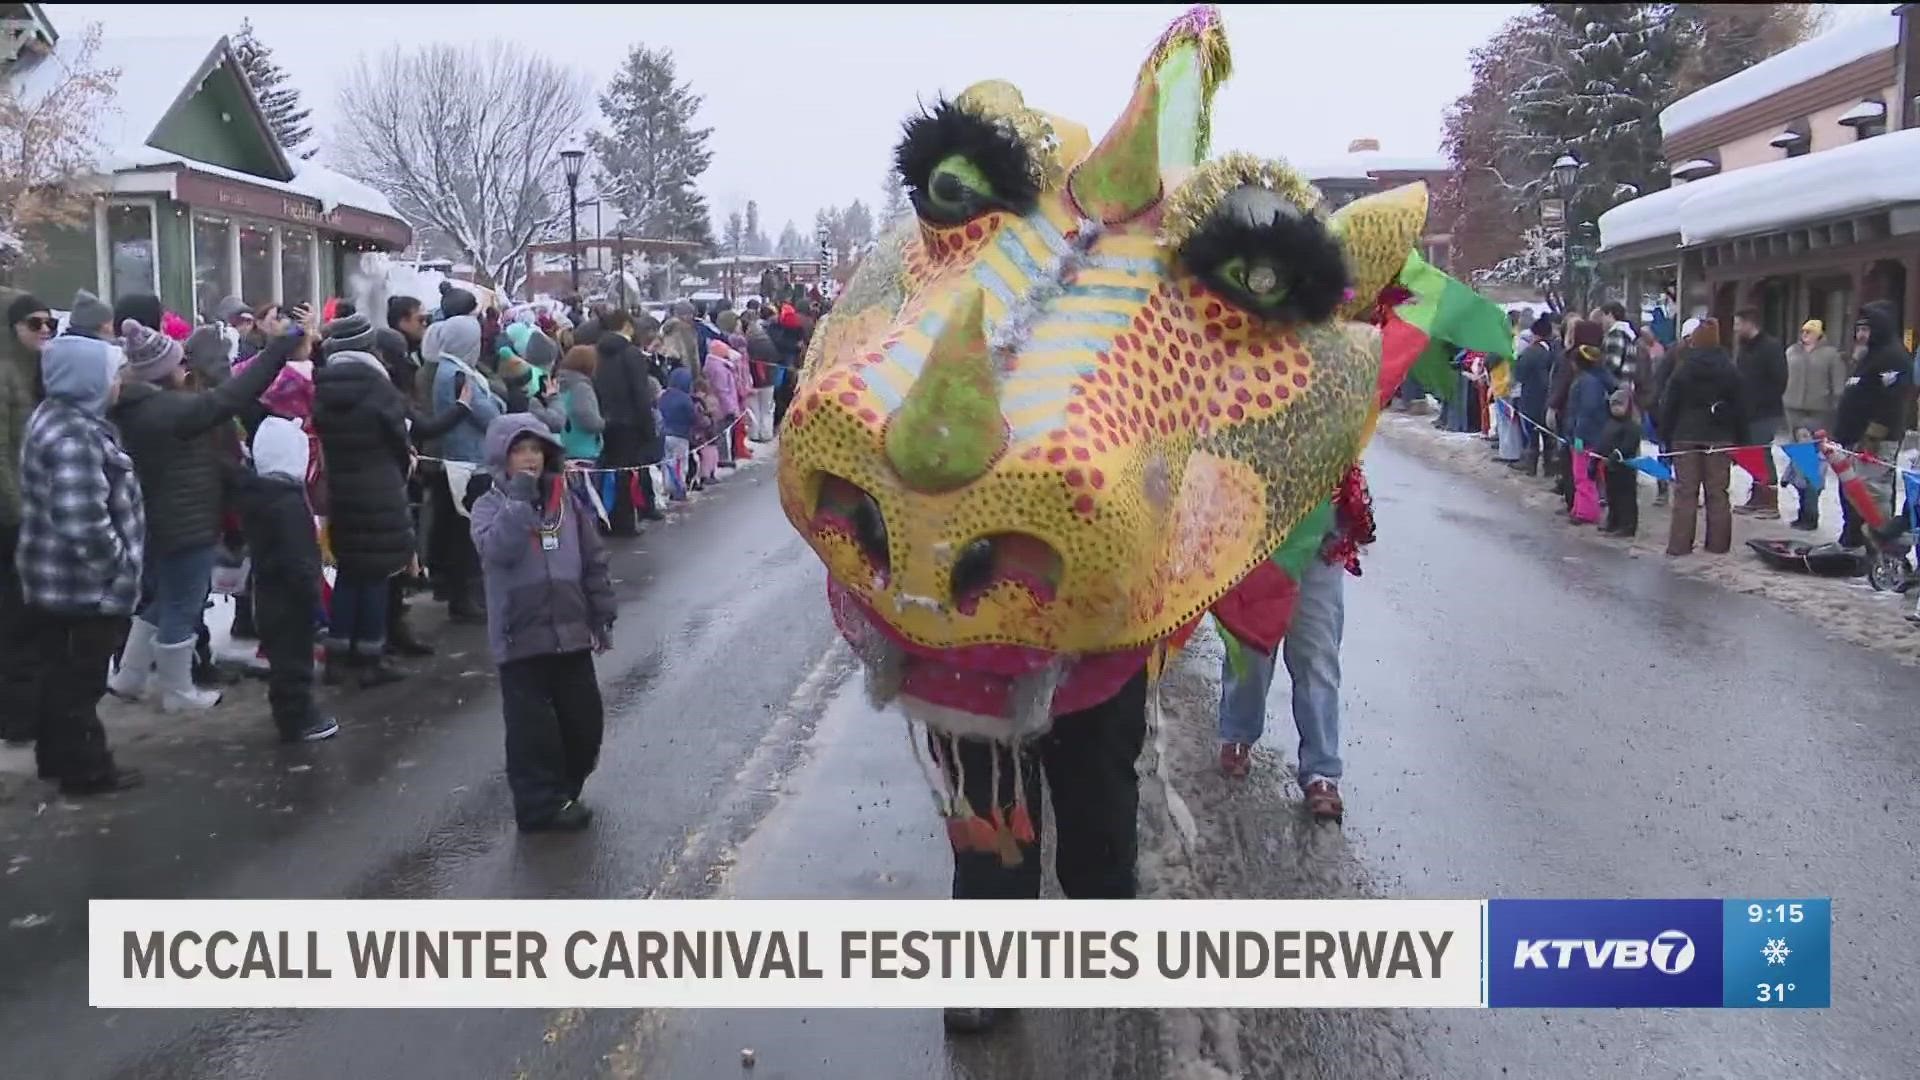 One of Idaho's favorite small-town winter events kicked off Friday night. The 2023 McCall Winter Carnival runs through Sunday, Feb. 5.